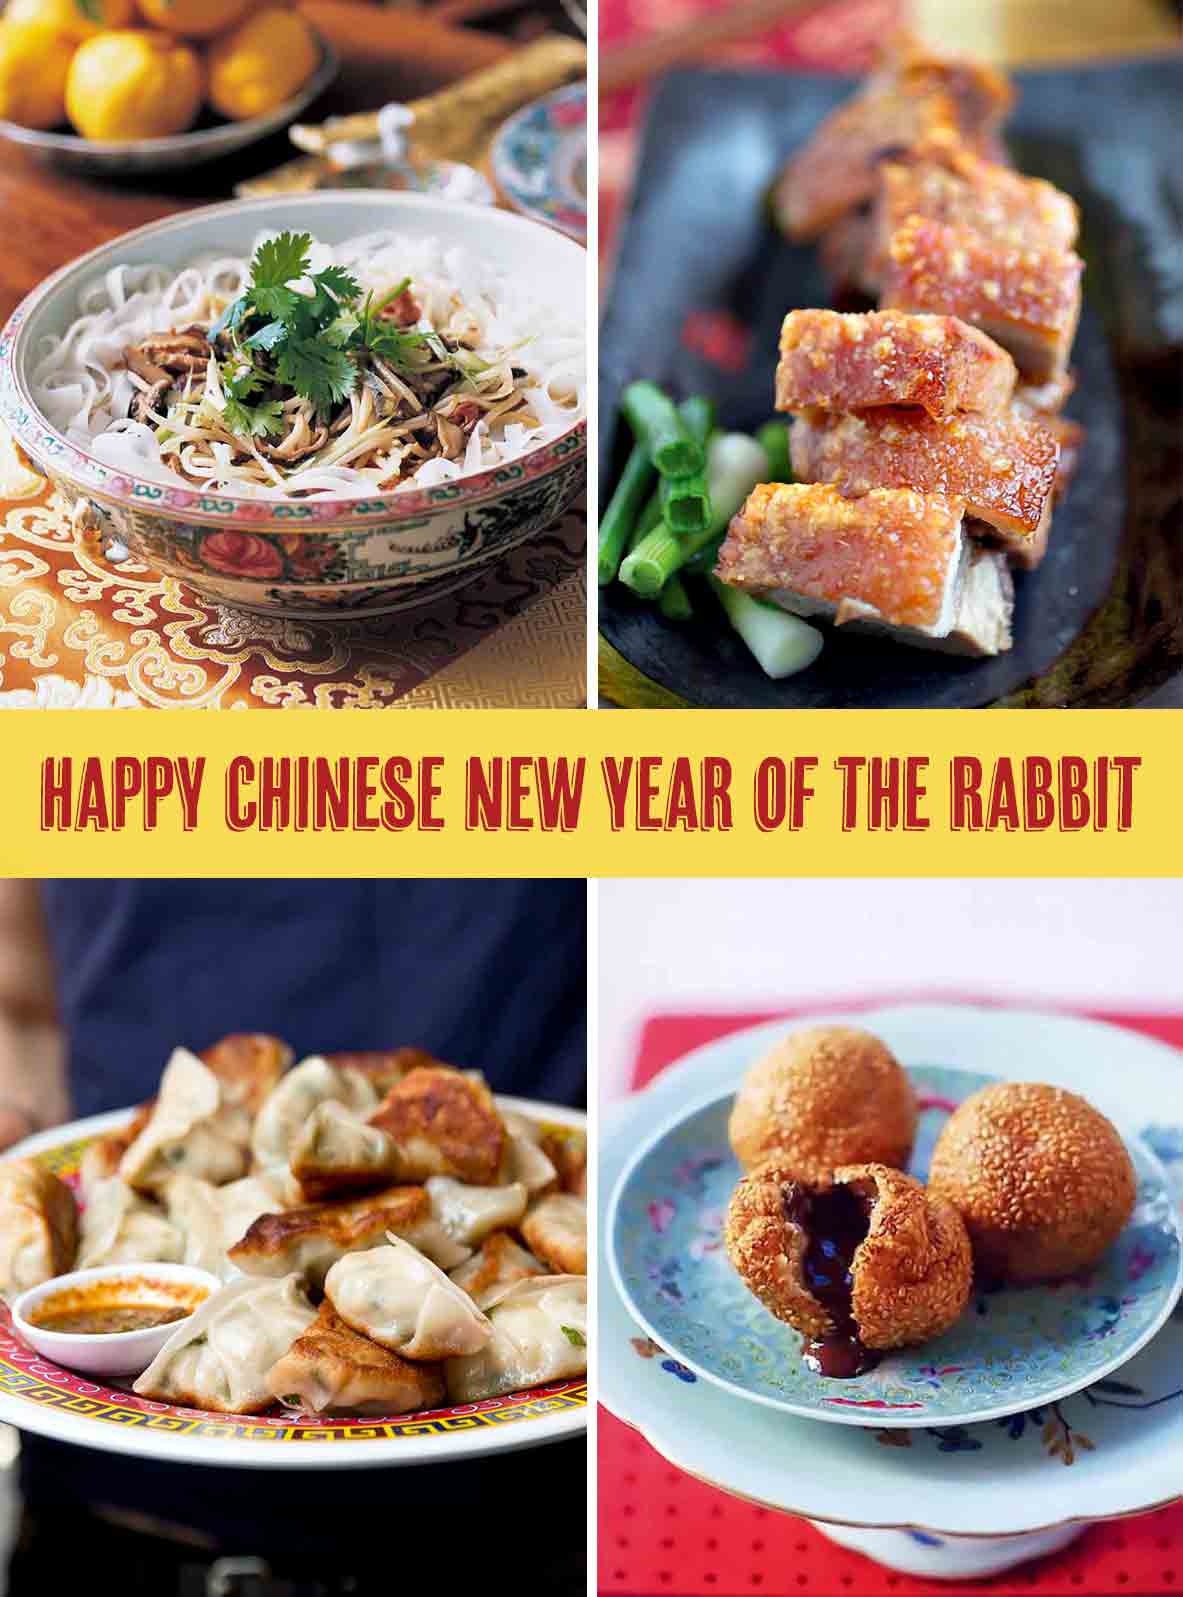 Four images: Chinese noodles in a bowl, fried pork belly on a black plate, a man's hands holding pork dumplings, chocolate-filled sesame dumplings.